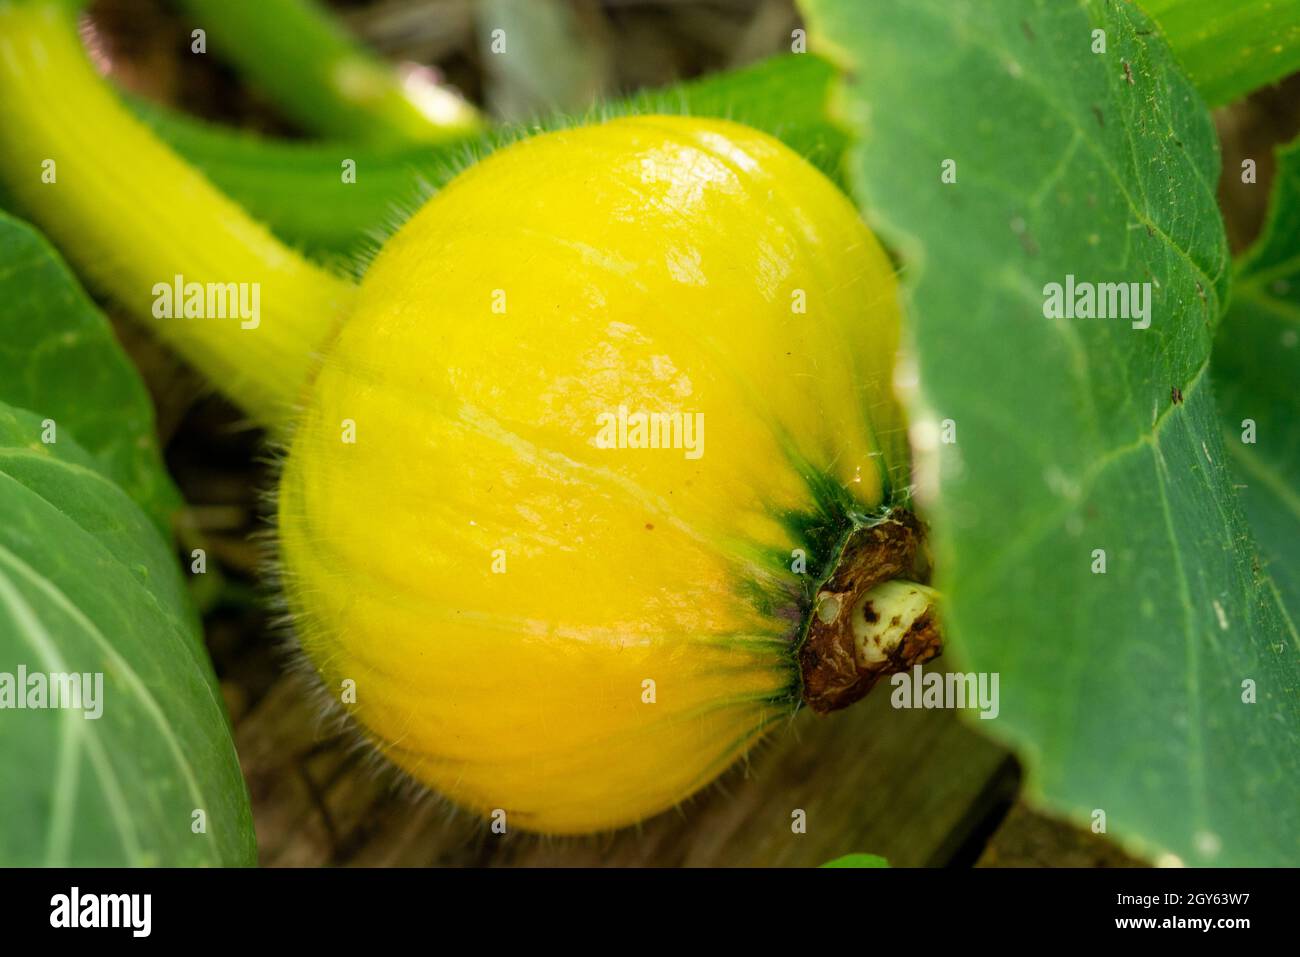 A large raw round yellow zucchini vegetable growing on the ground with large leaves and tall stems. The fresh colorful organic crop has a thick skin Stock Photo